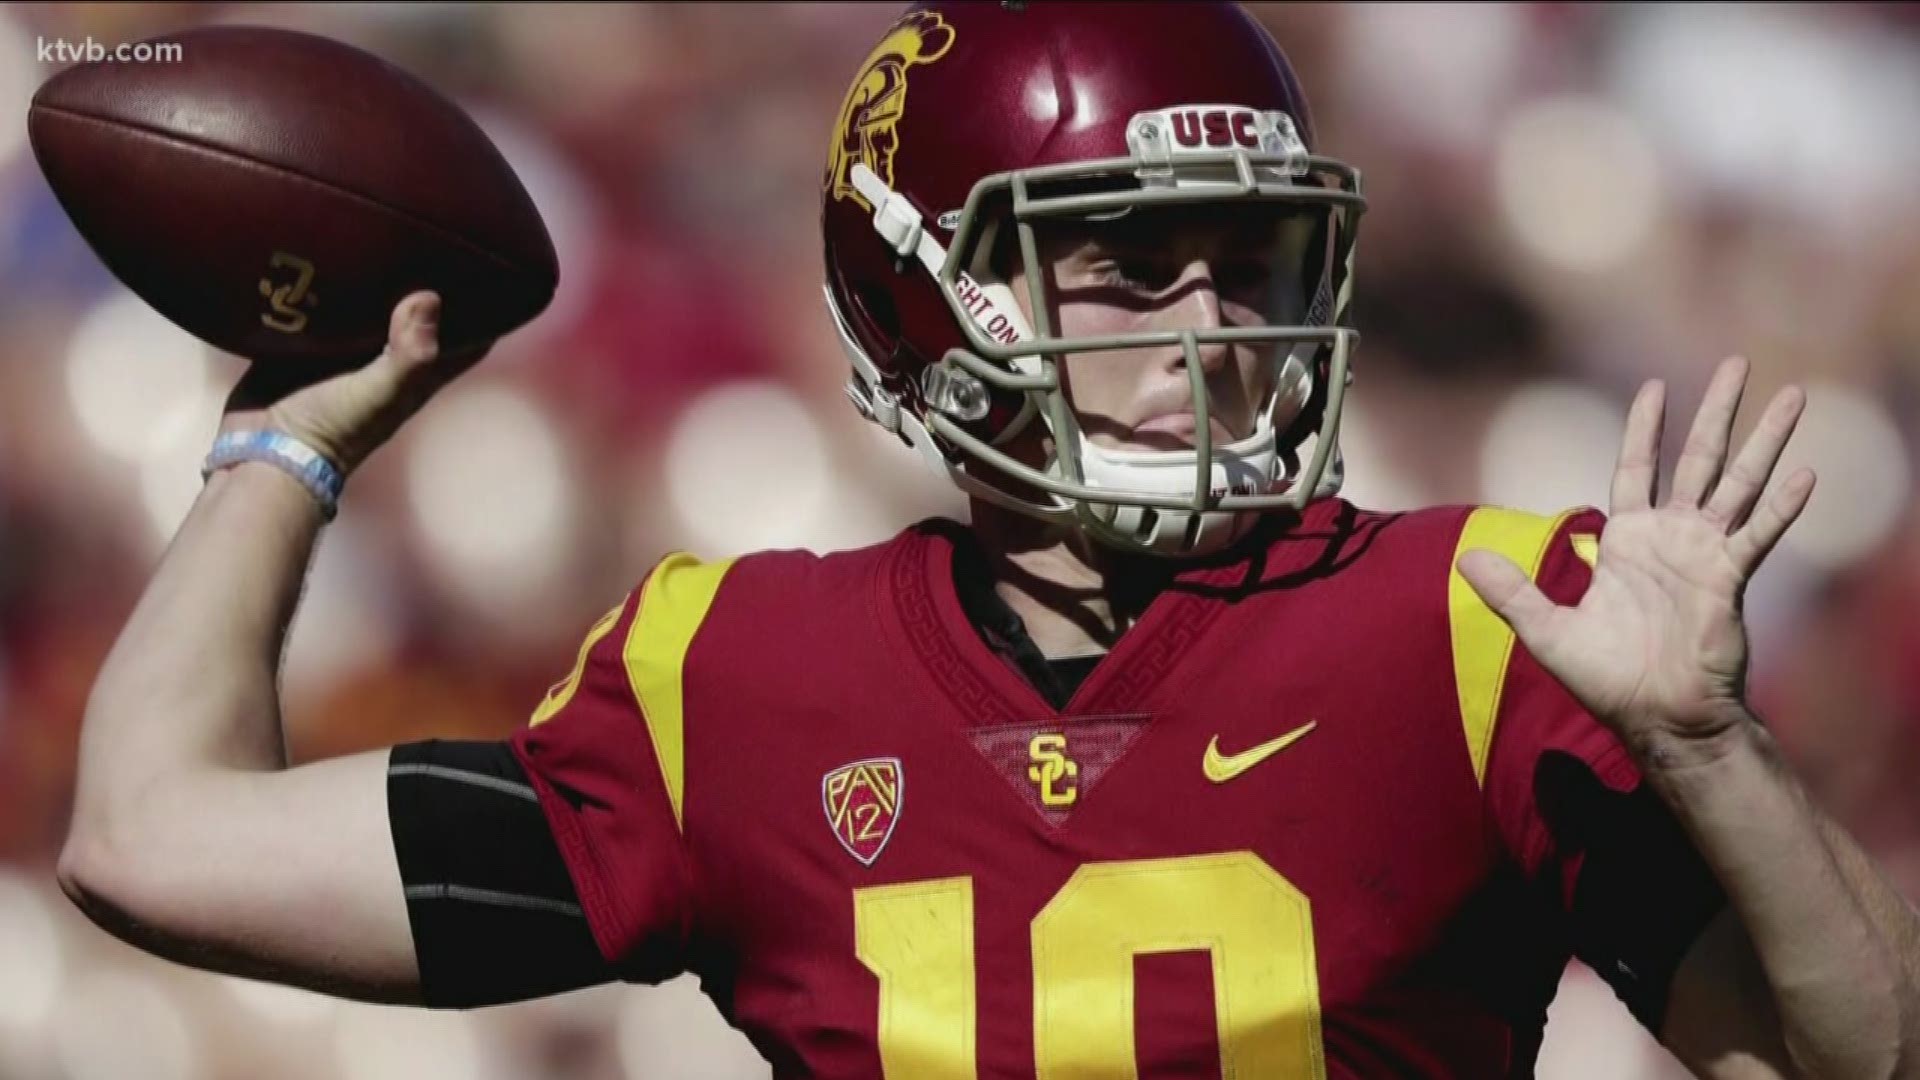 The Broncos announced the additions of USC grad transfer QB Jack Sears and JUCO RB Taequan Tyler.